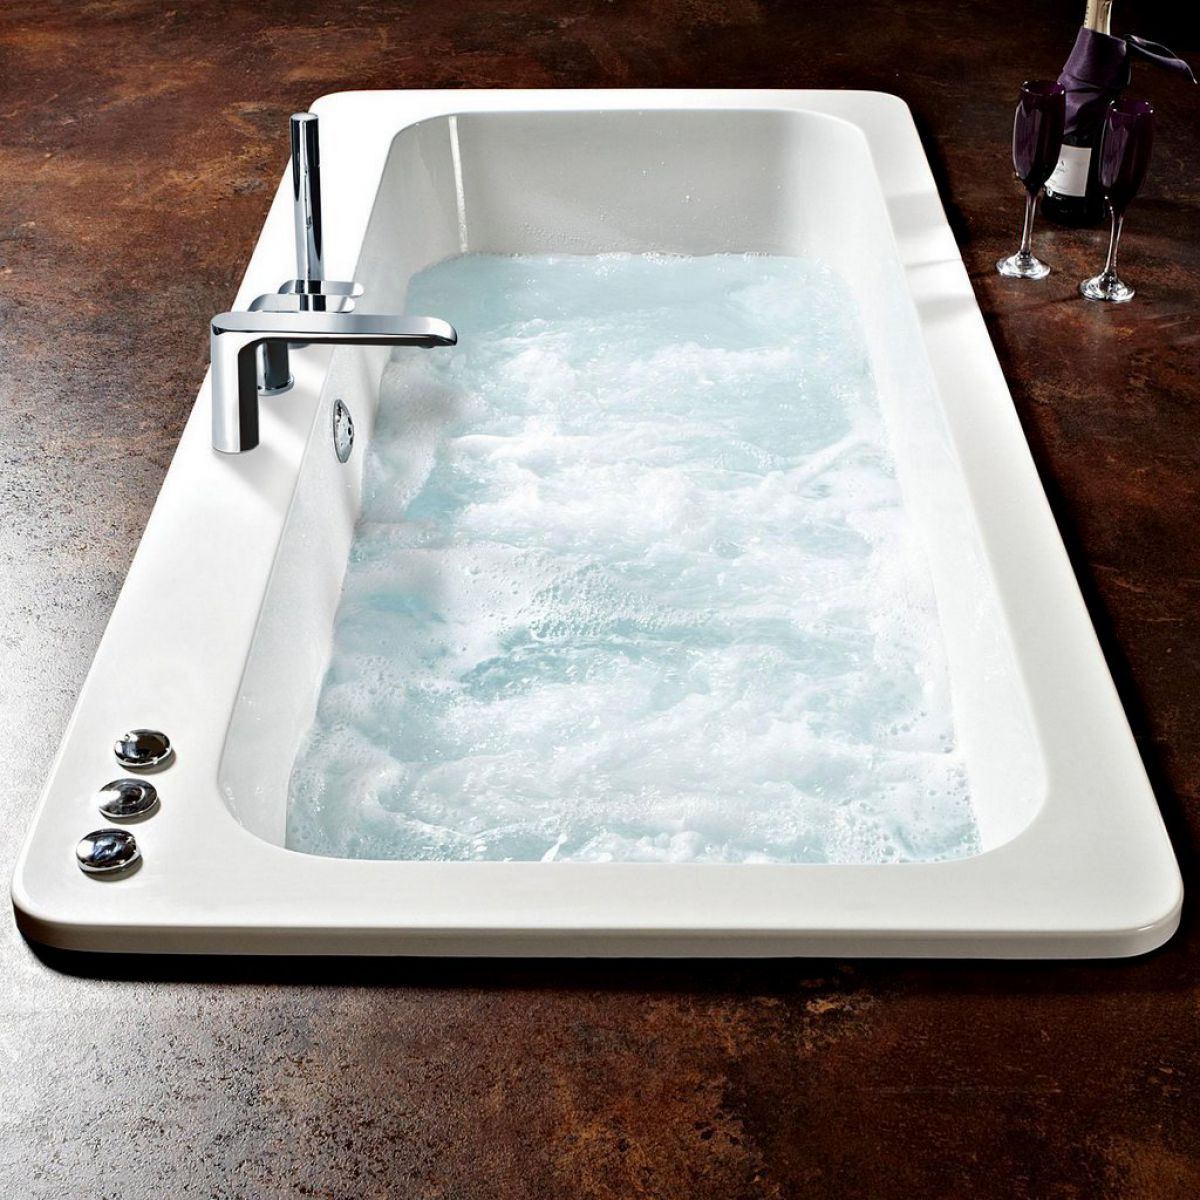 image example of a whirlpool bath